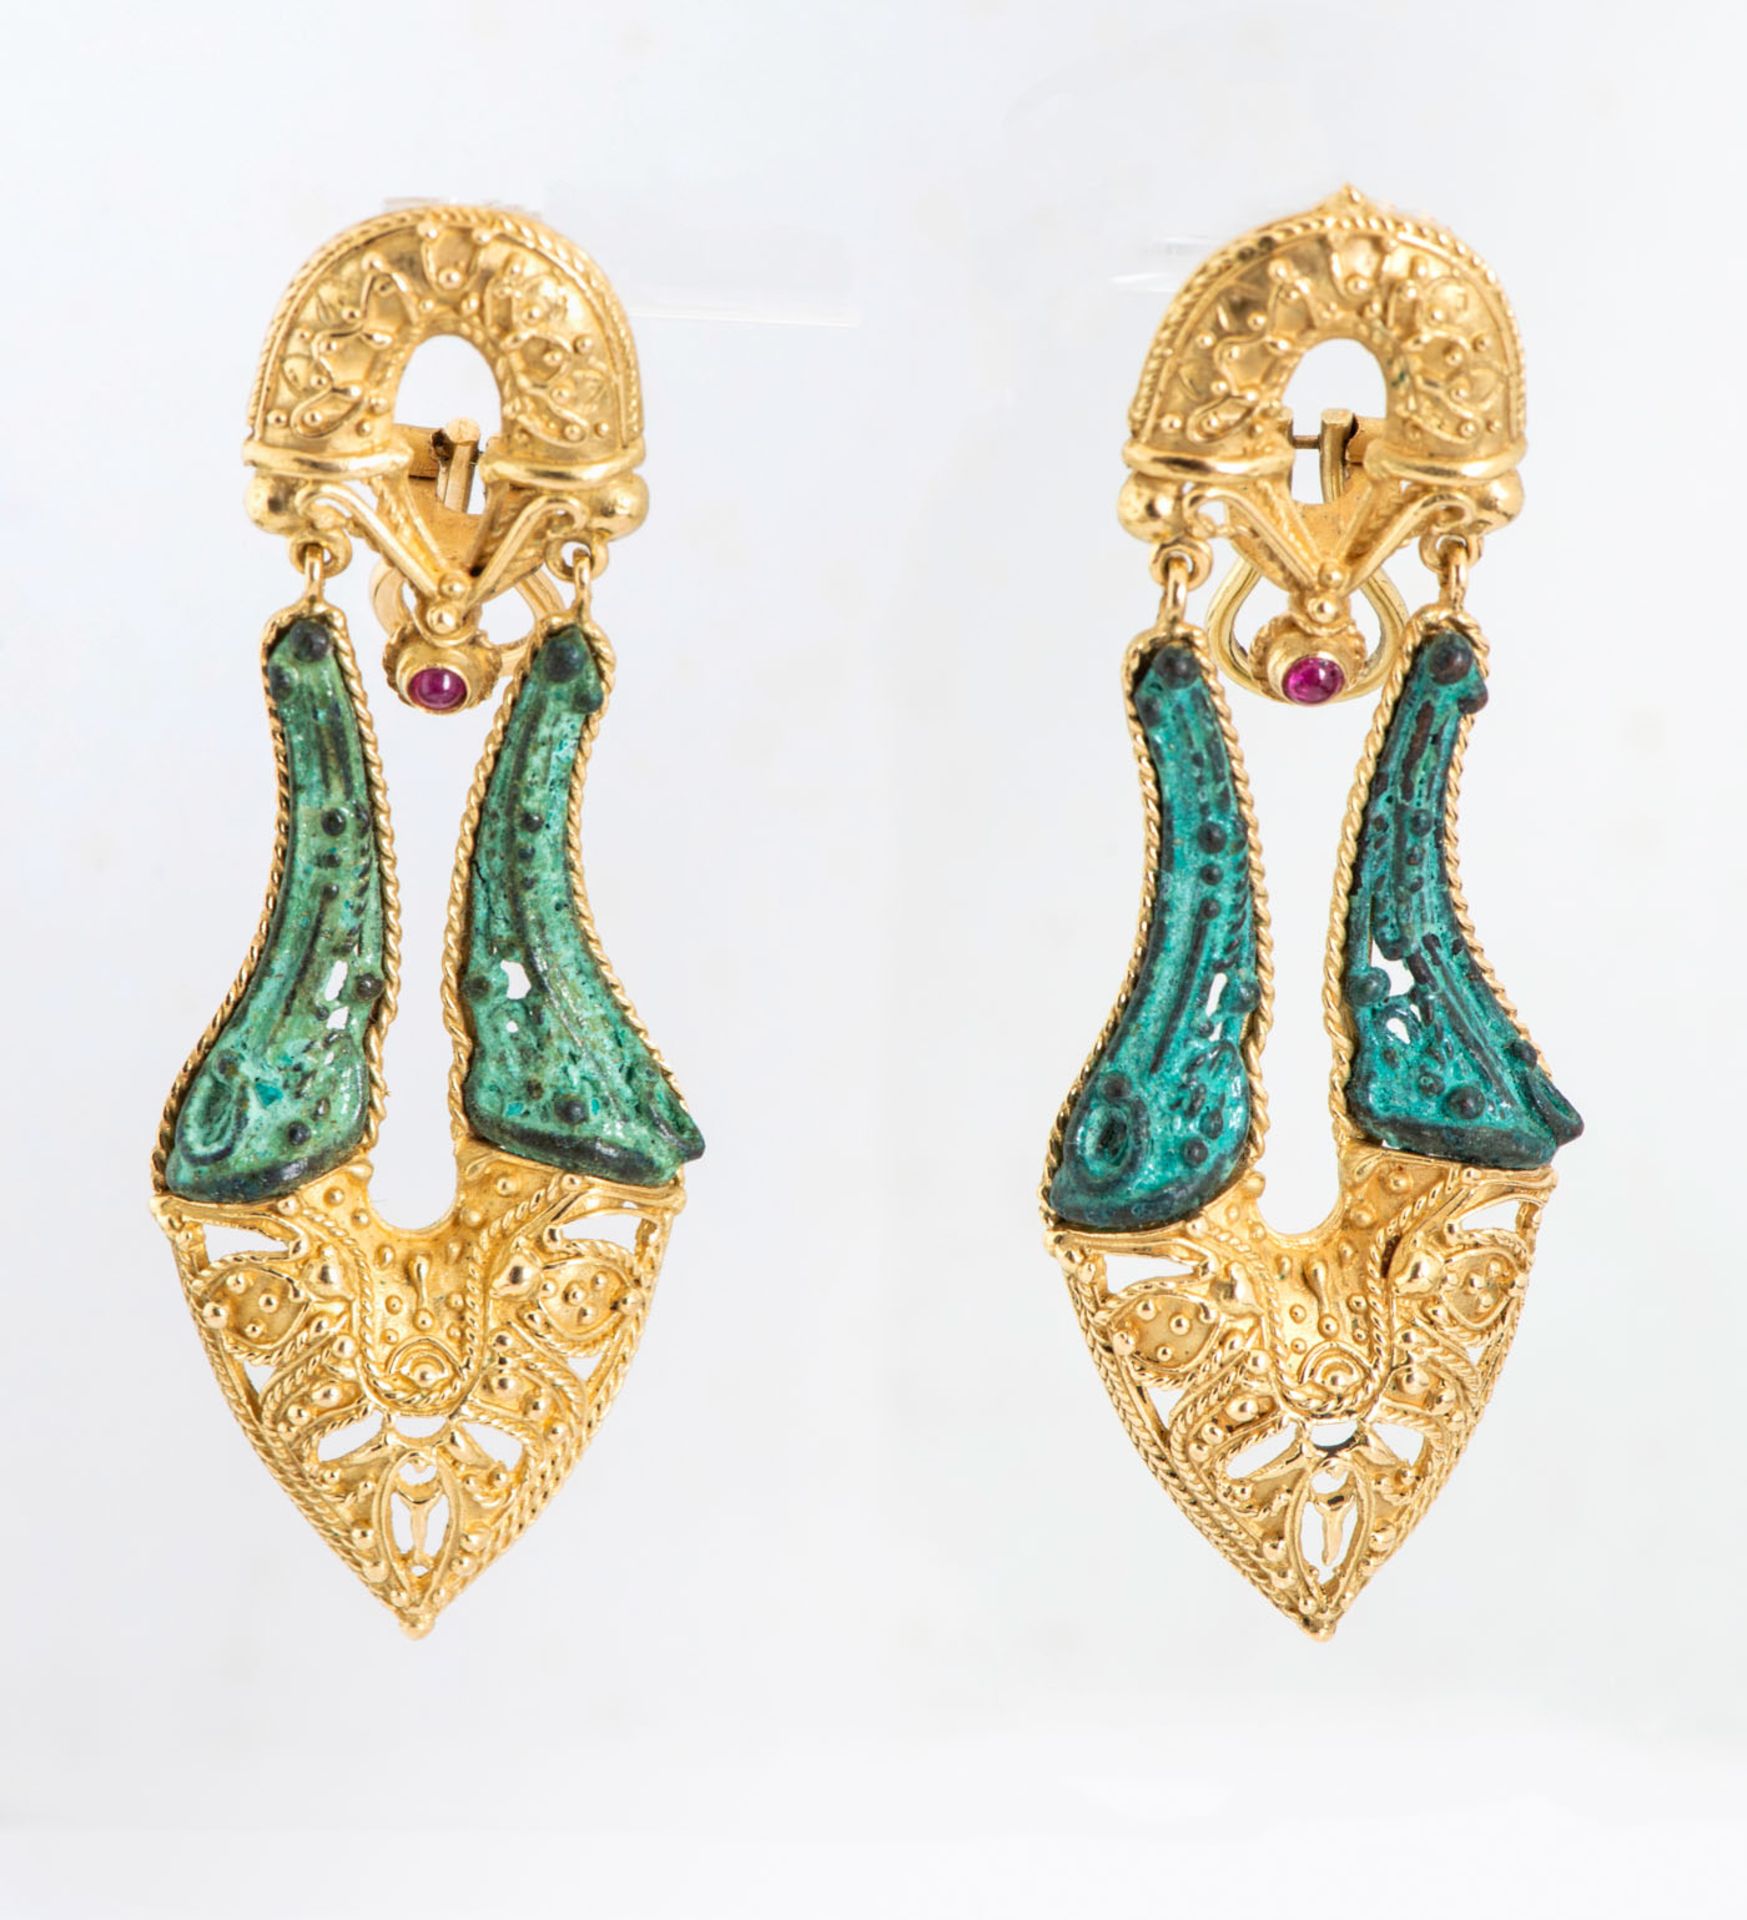 A Fine Pair of Archaic Style 18K Gold Earrings - Image 2 of 3